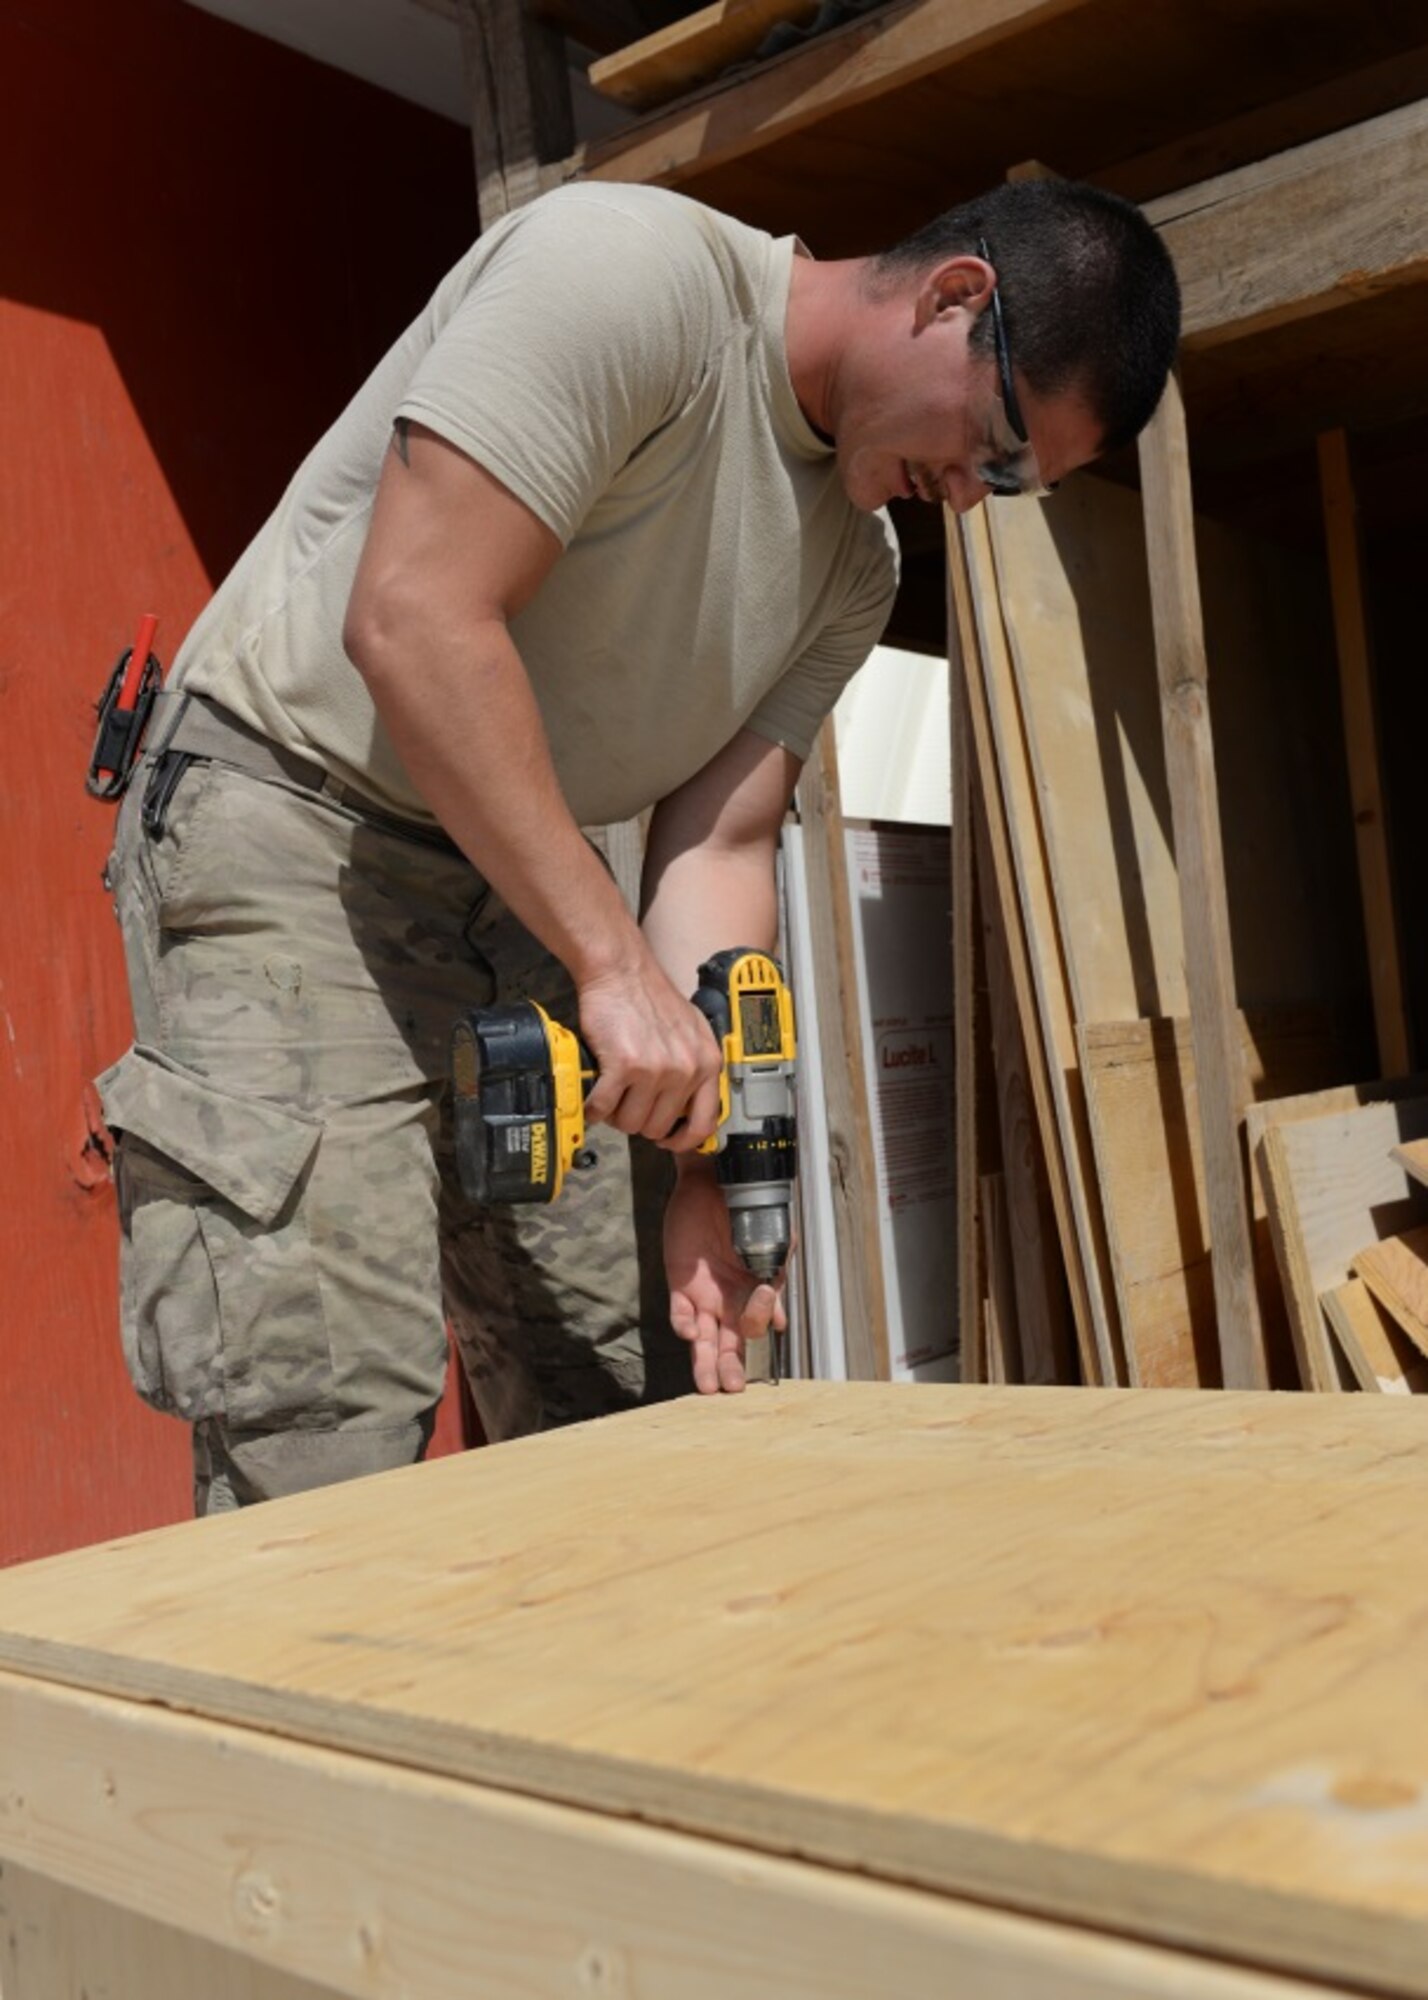 U.S. Air Force Senior Airman Carl Vanlandingham, 455th Expeditionary Civil Engineer Squadron structural journeyman, drills a screw into a handmade crate he made July 16, 2015, at Bagram Airfield, Afghanistan. Vanlandingham builds projects that are used to support the BAF mission such as crates, platforms and more. (U.S. Air Force photo by Senior Airman Cierra Presentado/Released) 